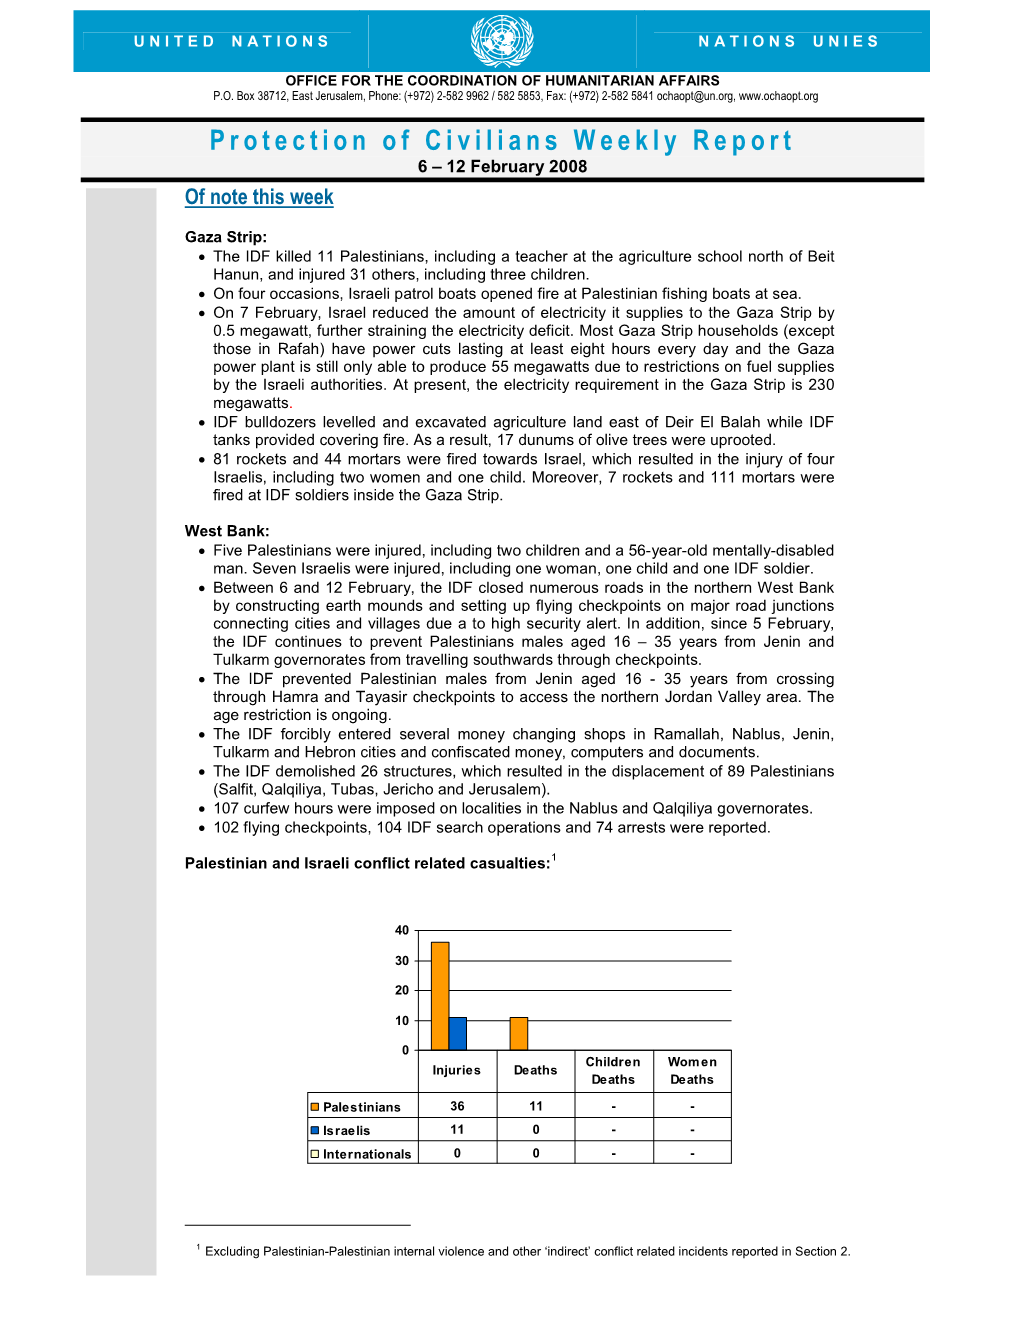 Protection of Civilians Weekly Report 6 – 12 February 2008 of Note This Week